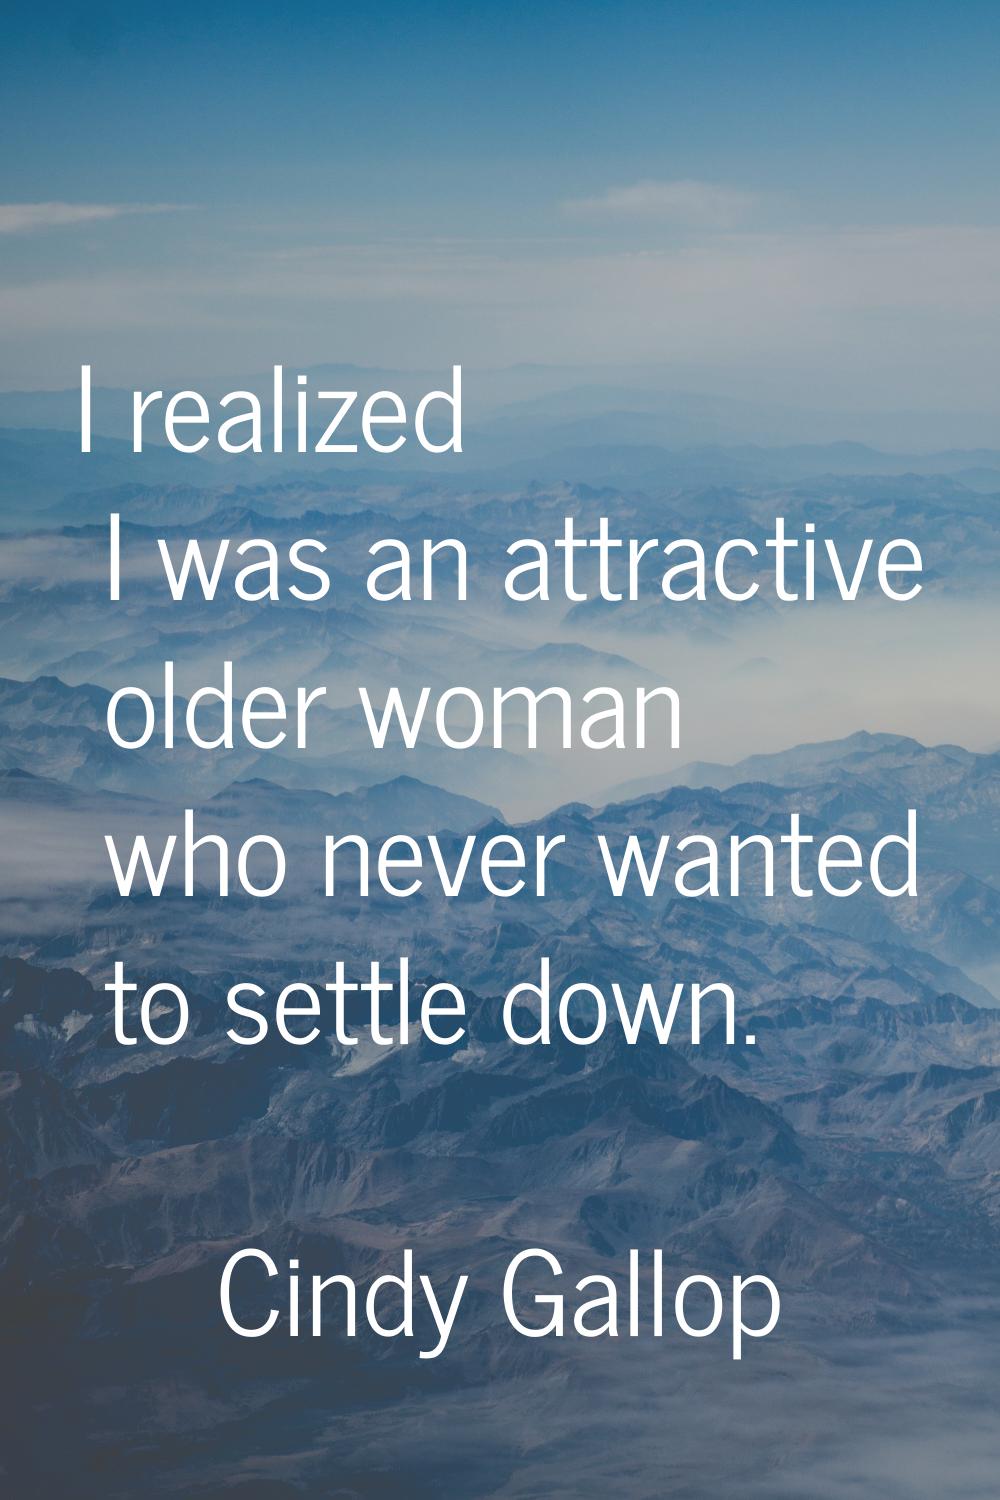 I realized I was an attractive older woman who never wanted to settle down.